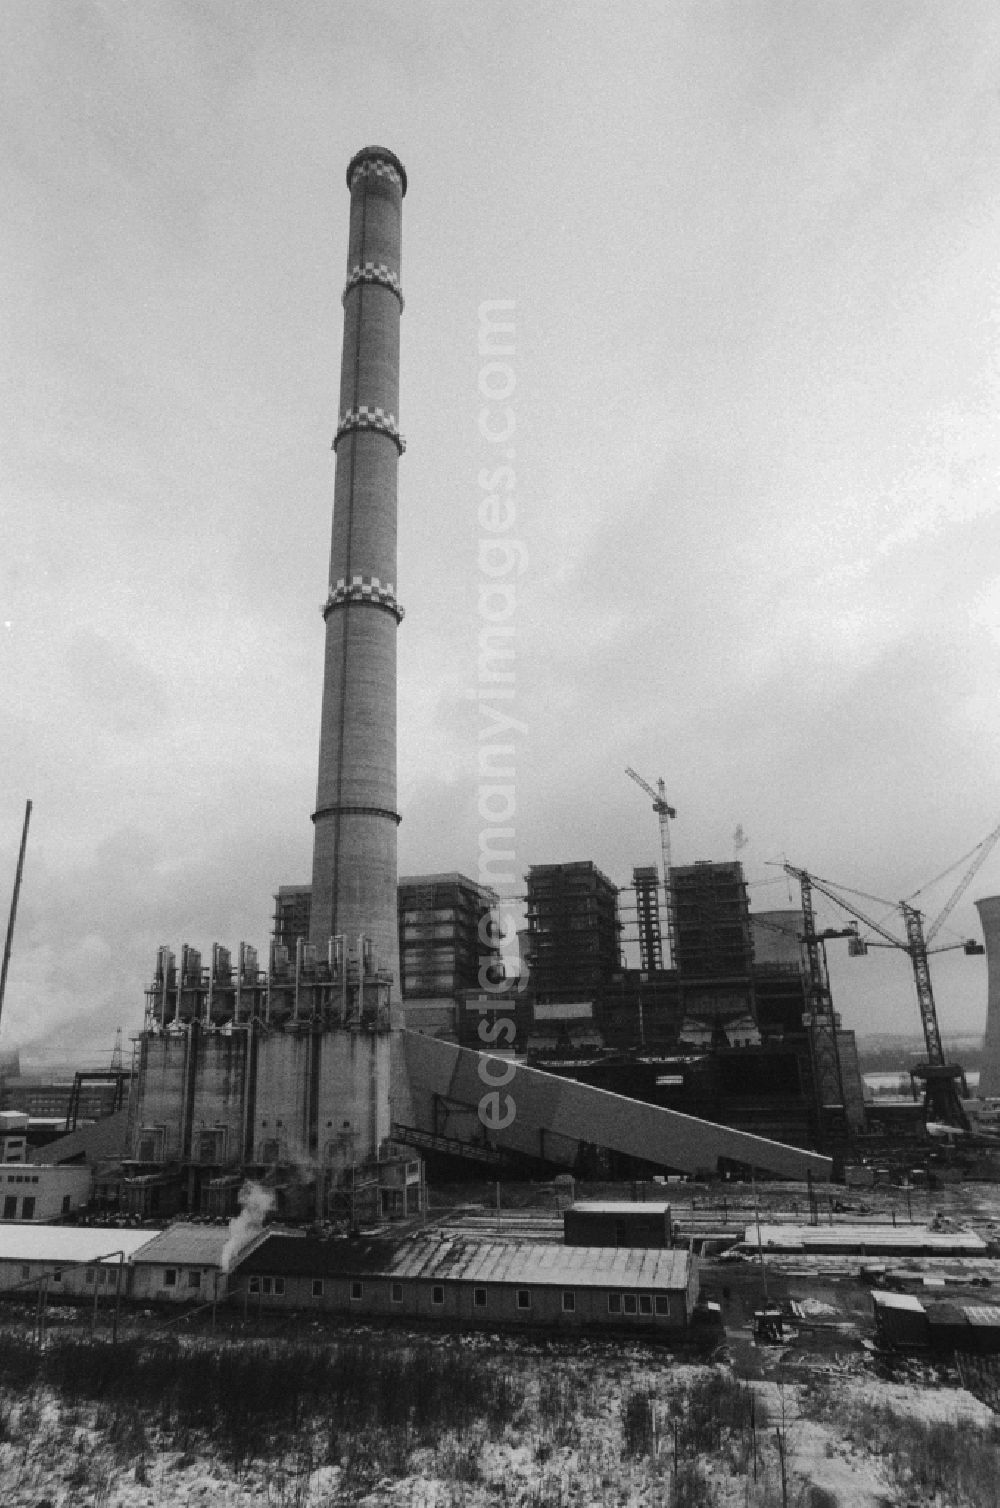 GDR photo archive: Hagenwerder - The power plant Hagenwerder, also called power plant Friendship of Nations in GDR times, in Hagenwerder in Saxony in the area of the former GDR, German Democratic Republic